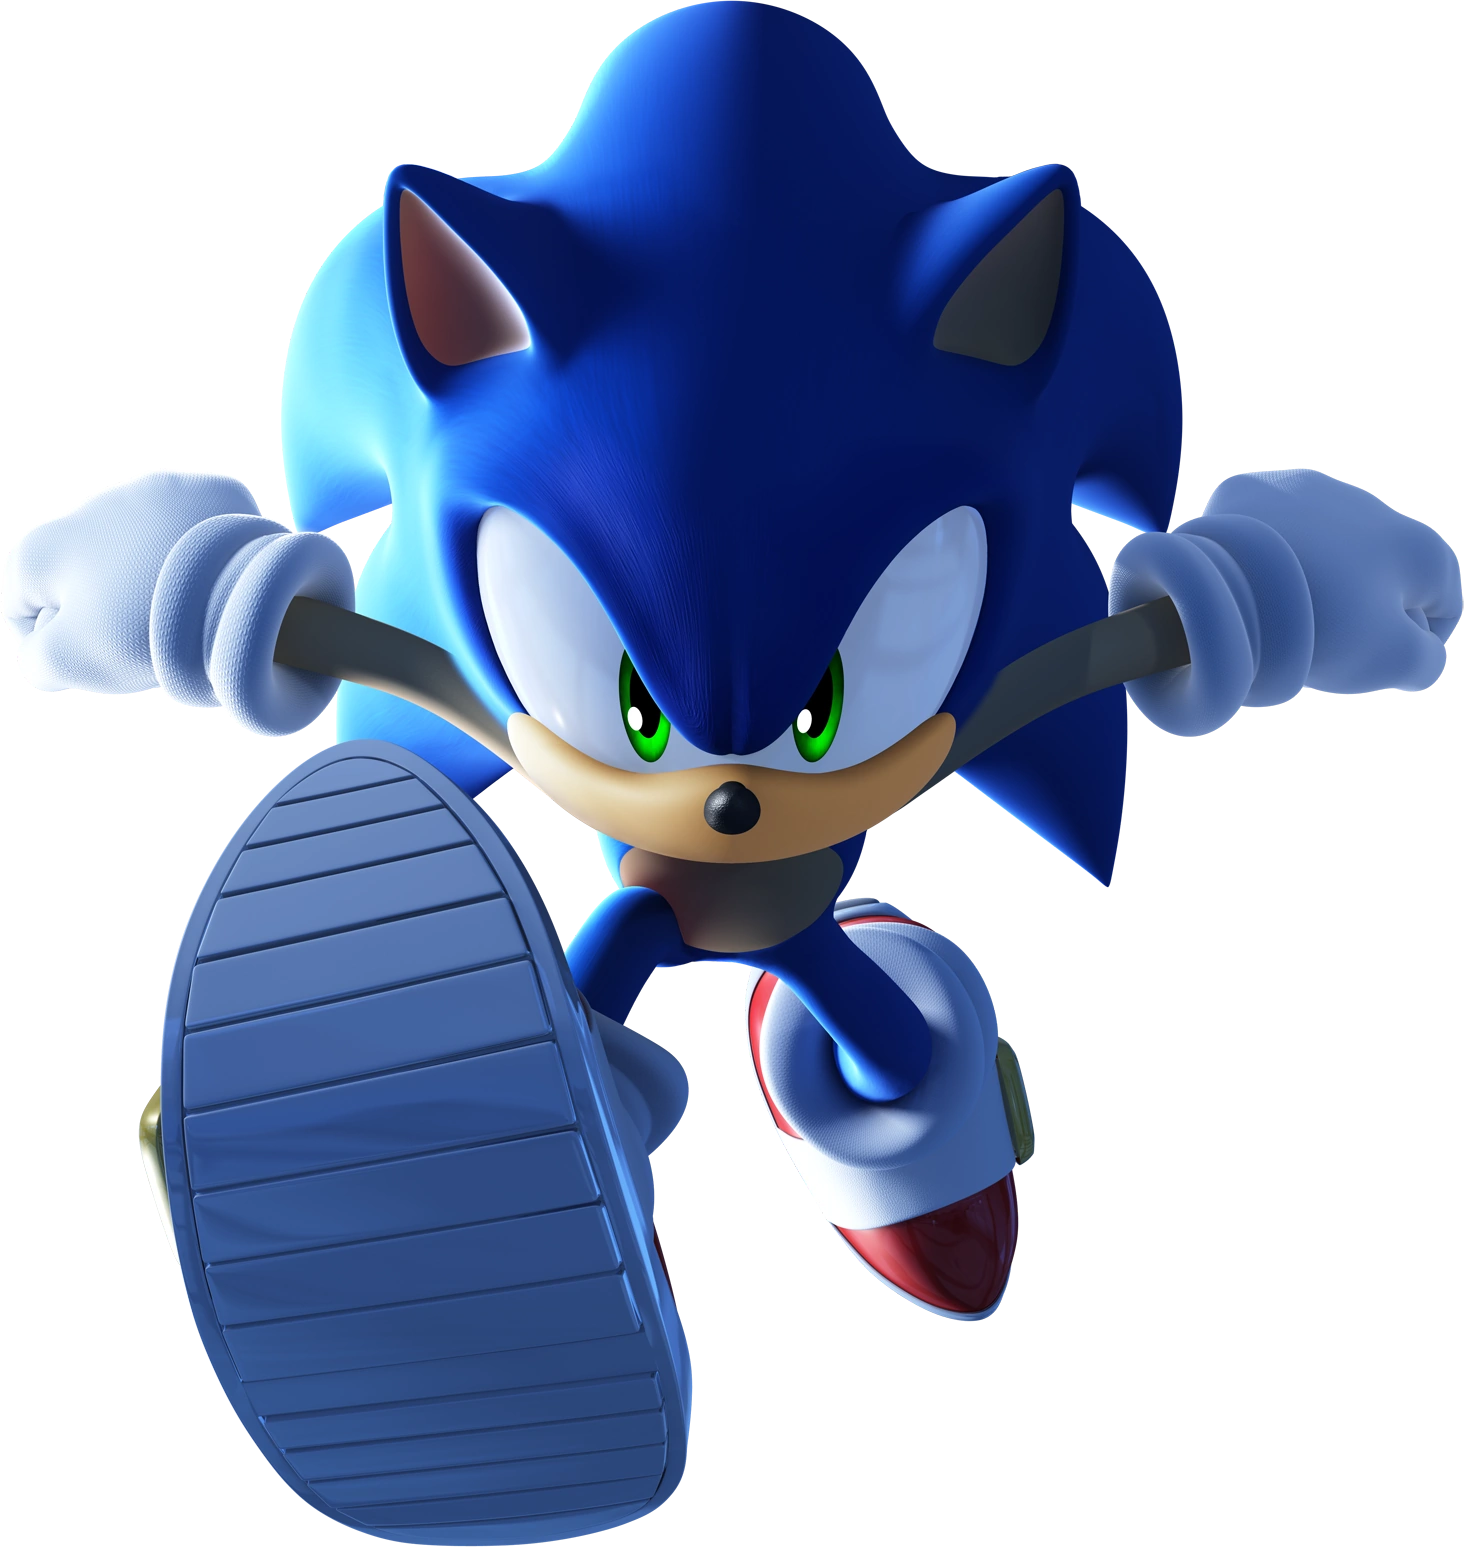 Sonic Unleashed PC GAME (2008) by SonicLoud1213 on DeviantArt